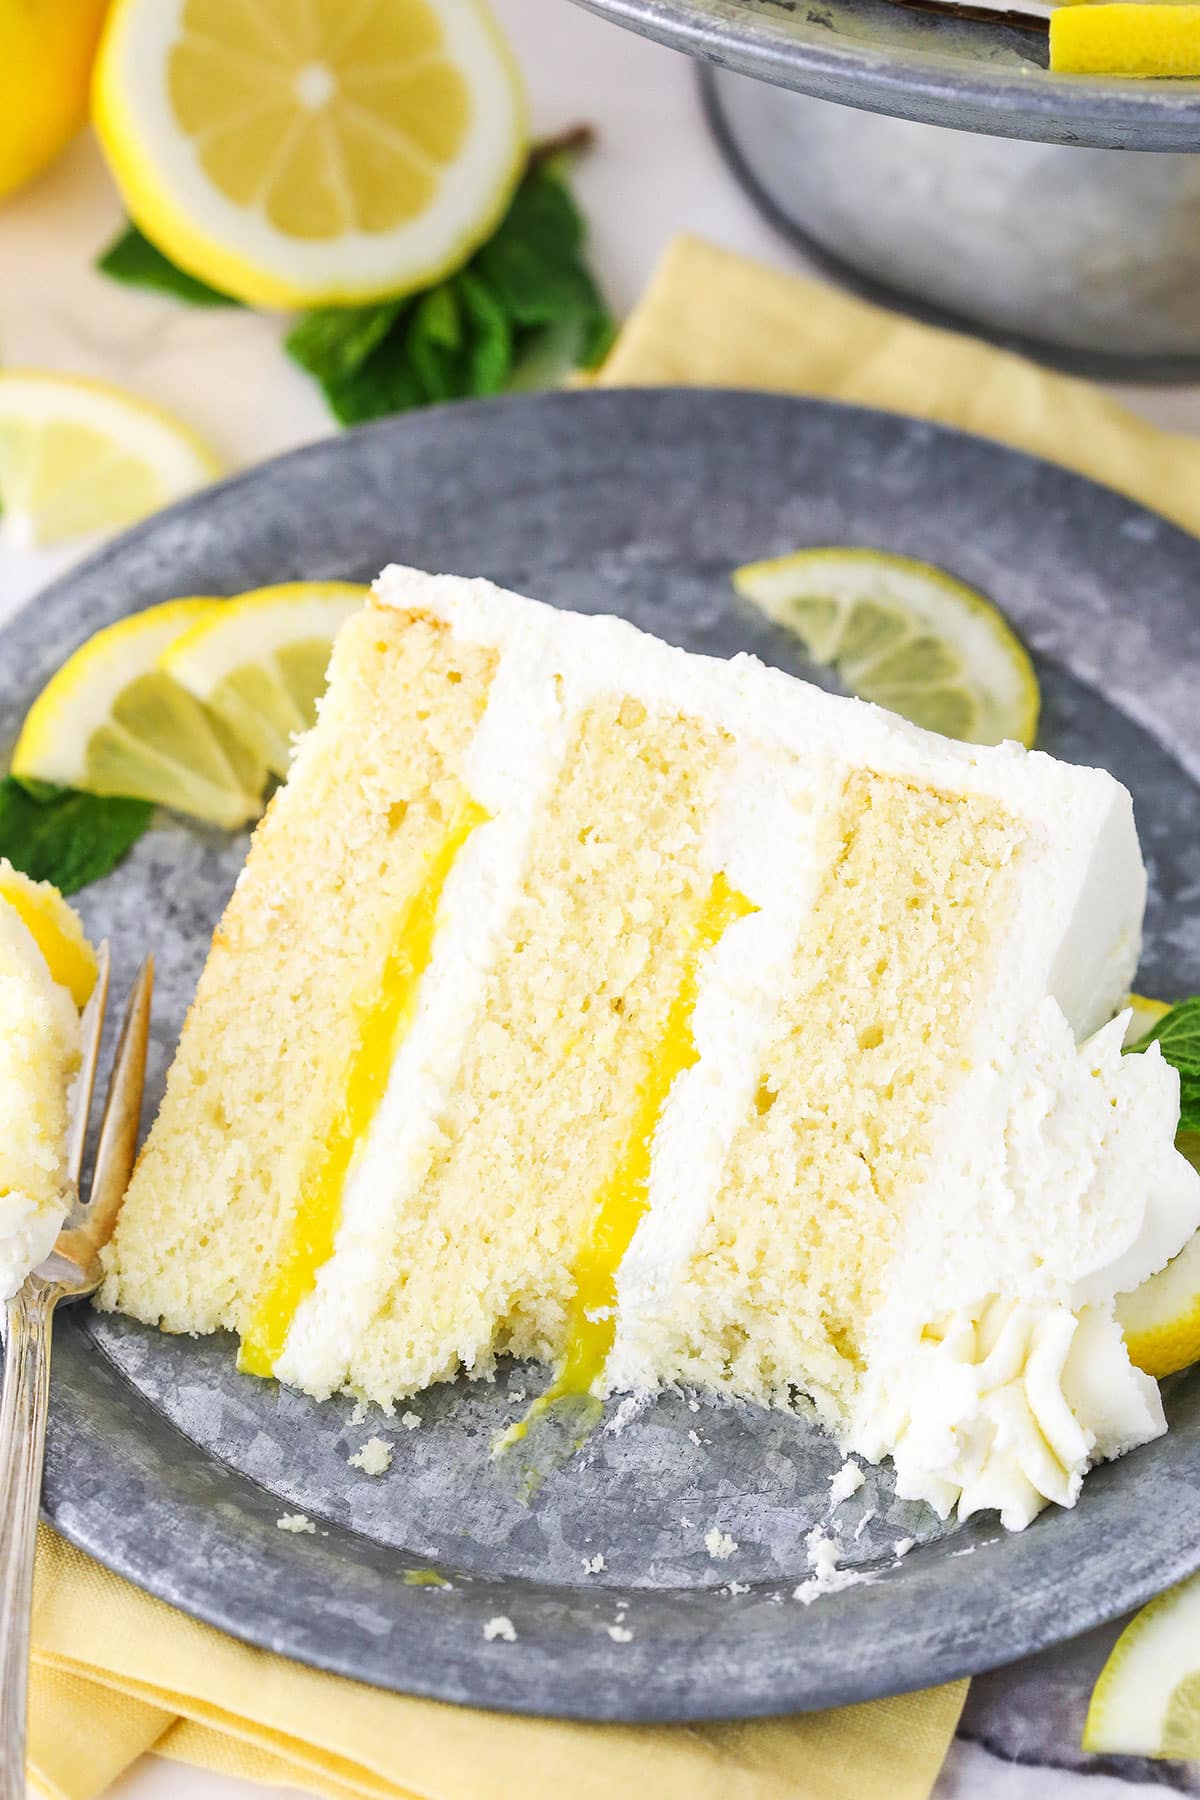 A slice of Lemon Mascarpone Layer Cake with a bite taken out on a metal colored plate with a fork and cut lemons in the background